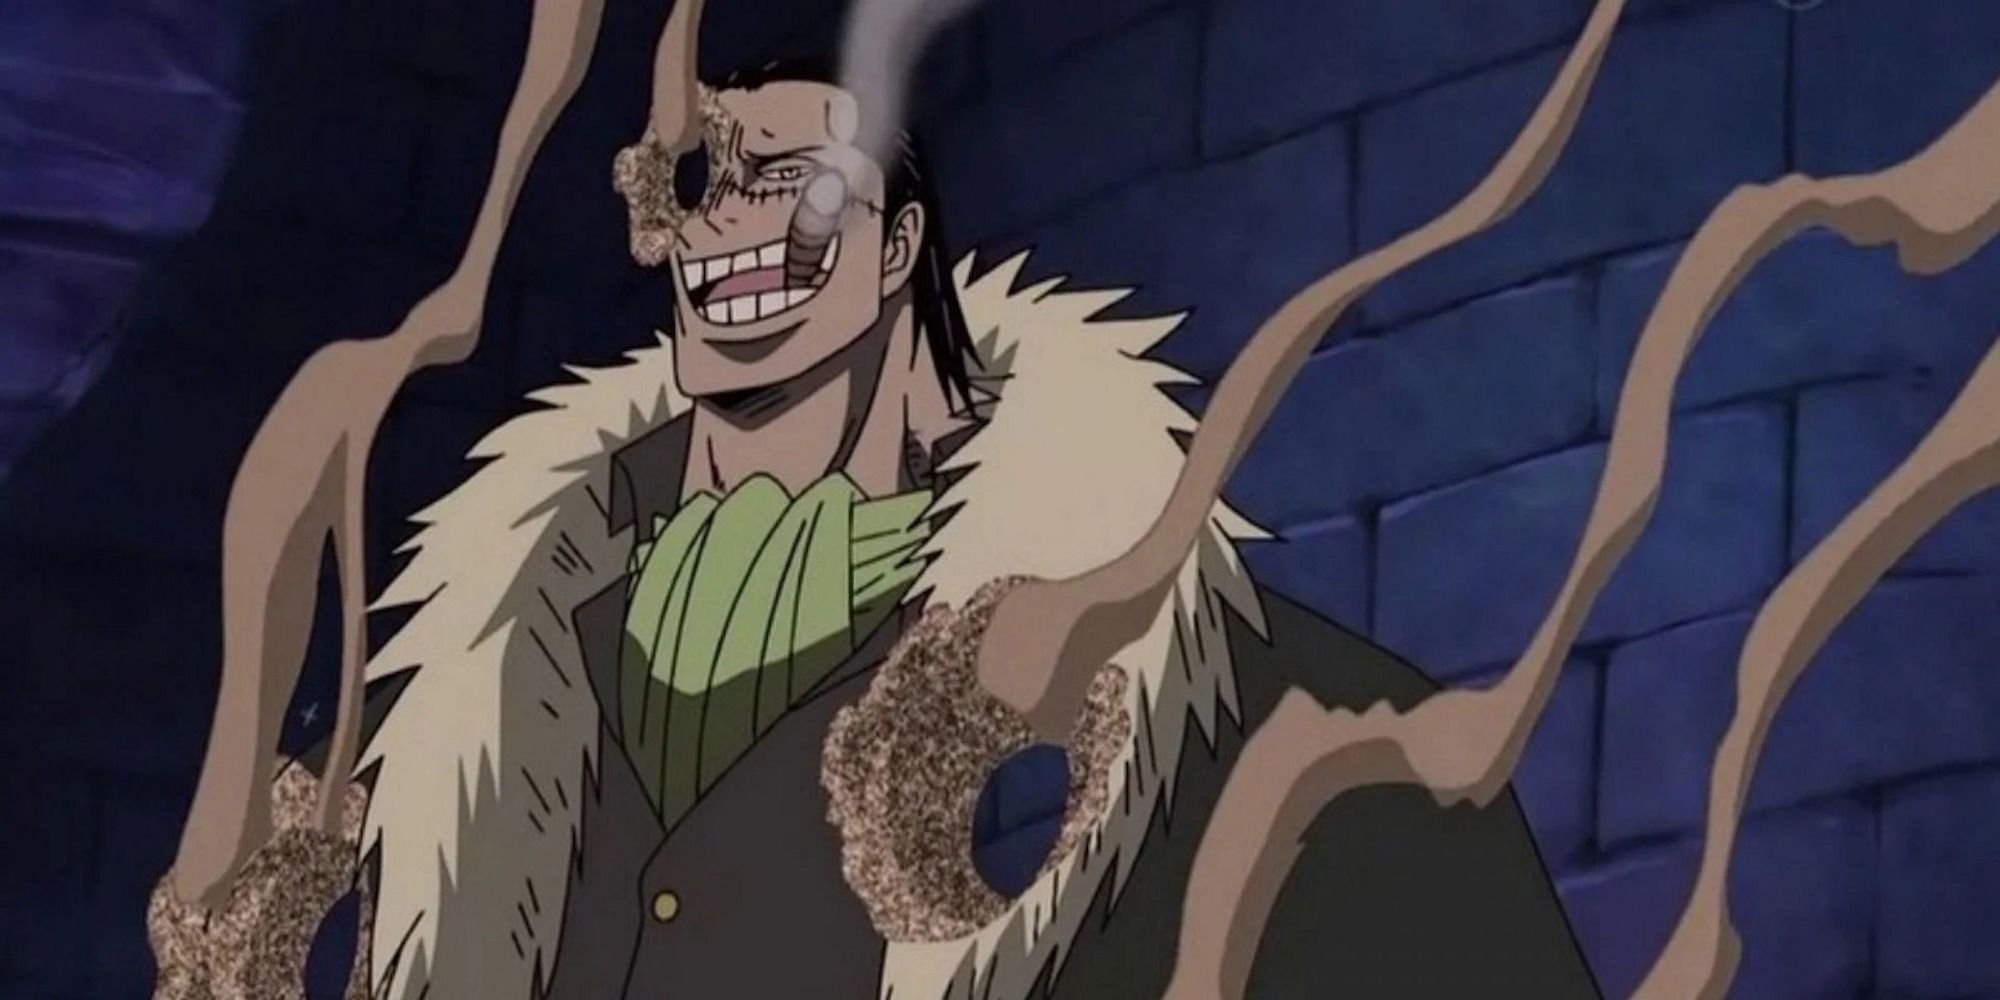 Crocodile from One Piece